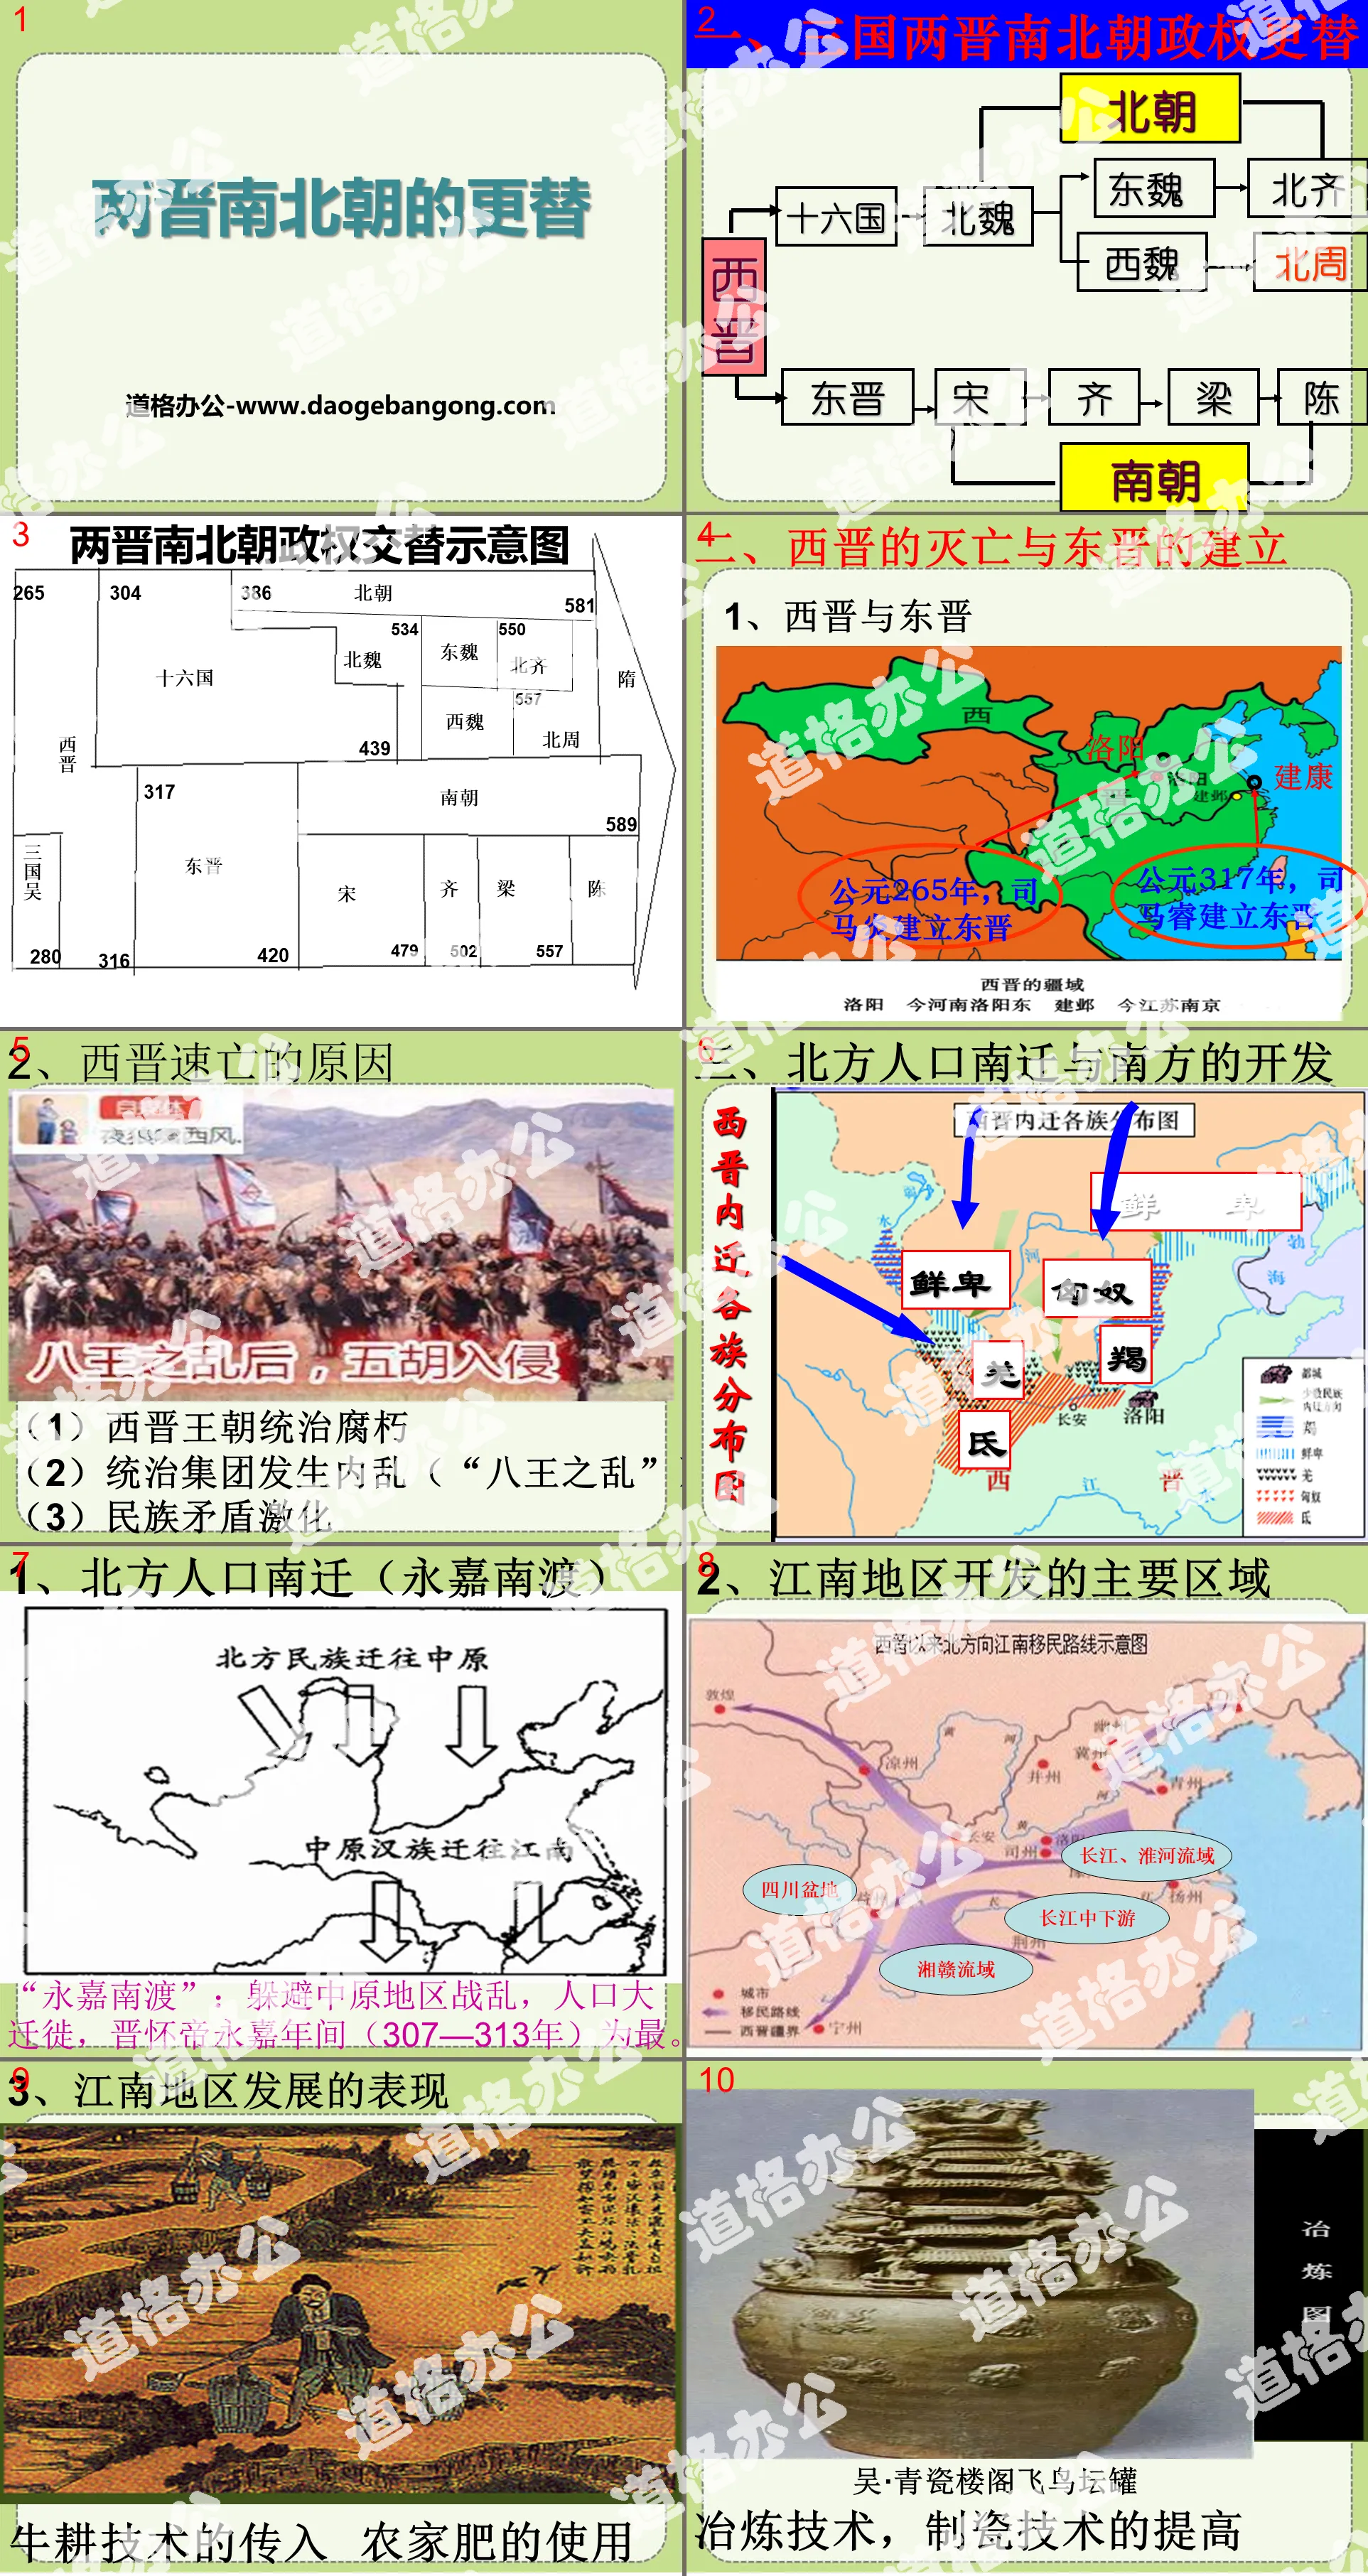 "The Change of the Two Jins and the Southern and Northern Dynasties" Separation of Regimes and Integration of Nationalities - Three Kingdoms, Two Jins, Southern and Northern Dynasties PPT Courseware